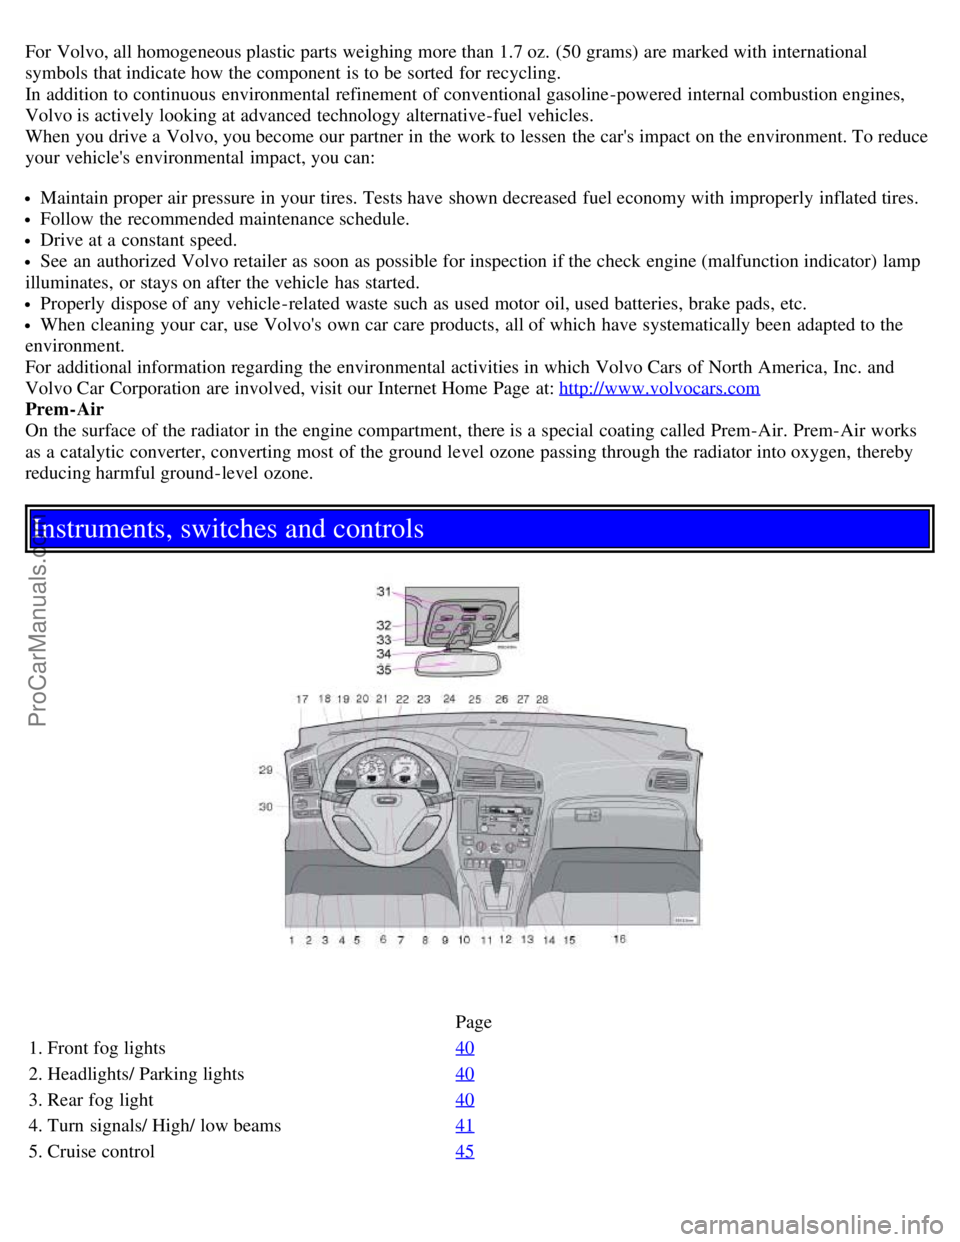 VOLVO S60 2002  Owners Manual For Volvo, all homogeneous plastic parts  weighing more than 1.7 oz.  (50 grams) are marked with international
symbols that indicate how the component  is to be  sorted  for recycling.
In addition to 